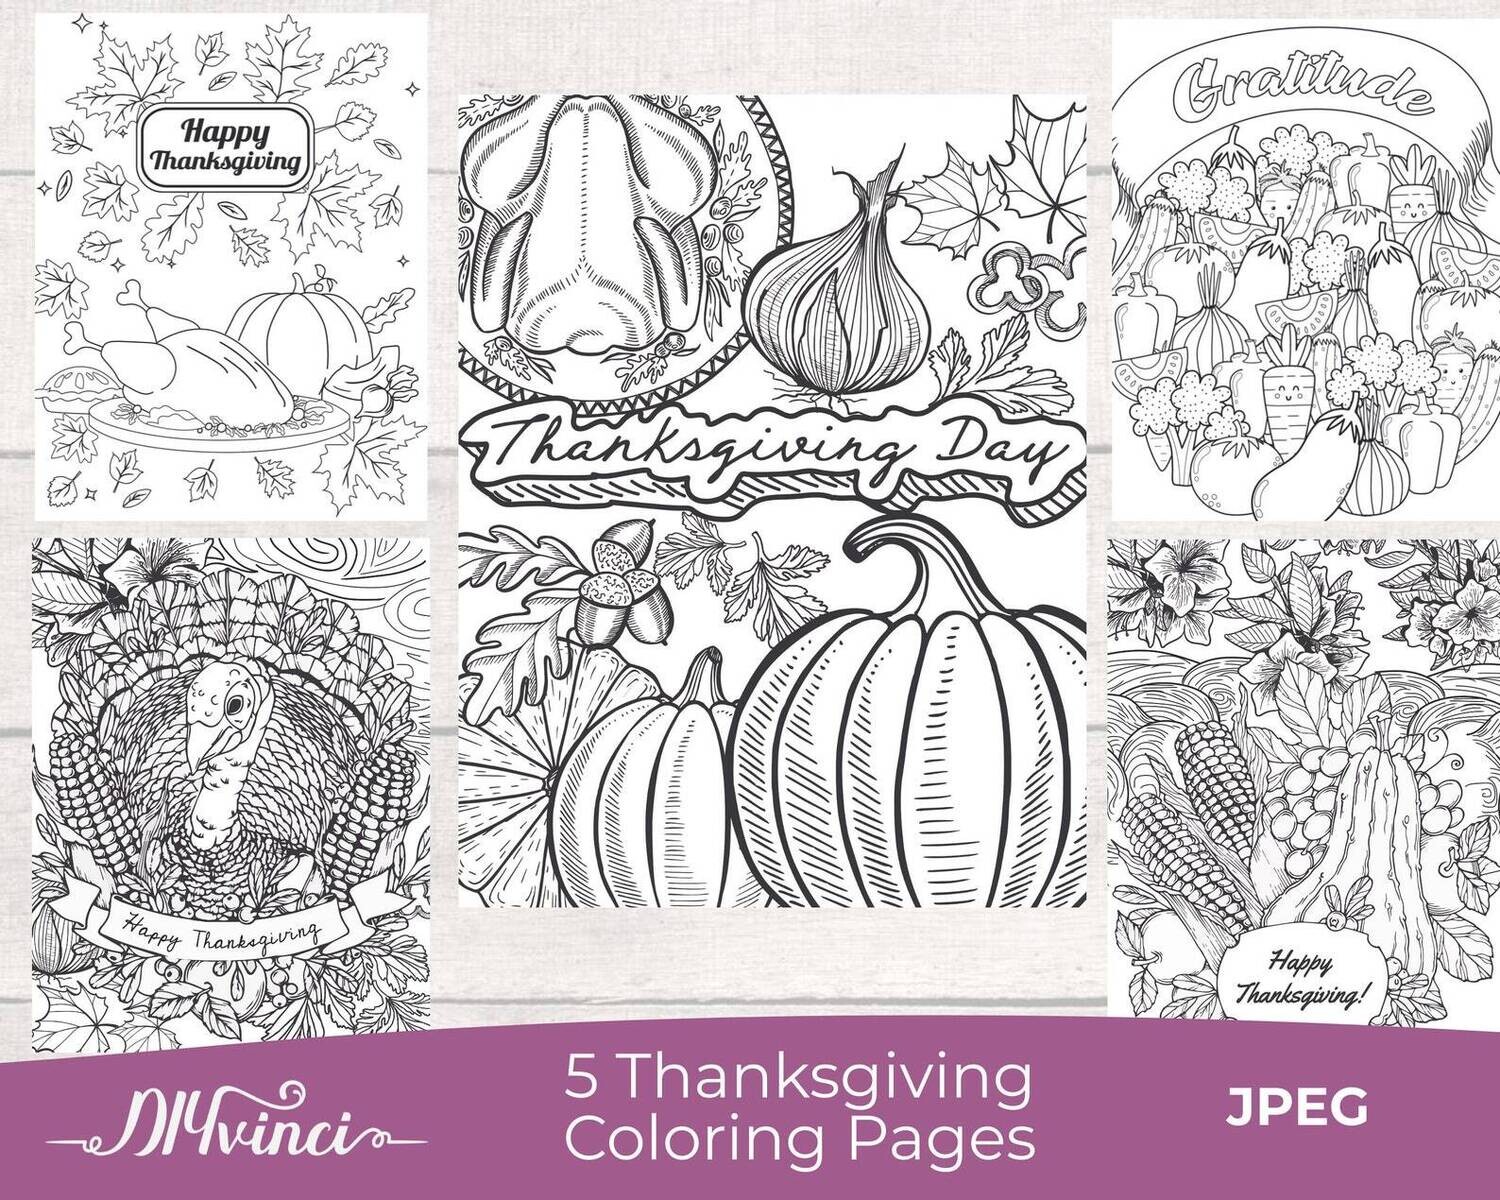 Printable Thanksgiving Coloring Pages   20 JPEG   Personal & Commercial Use